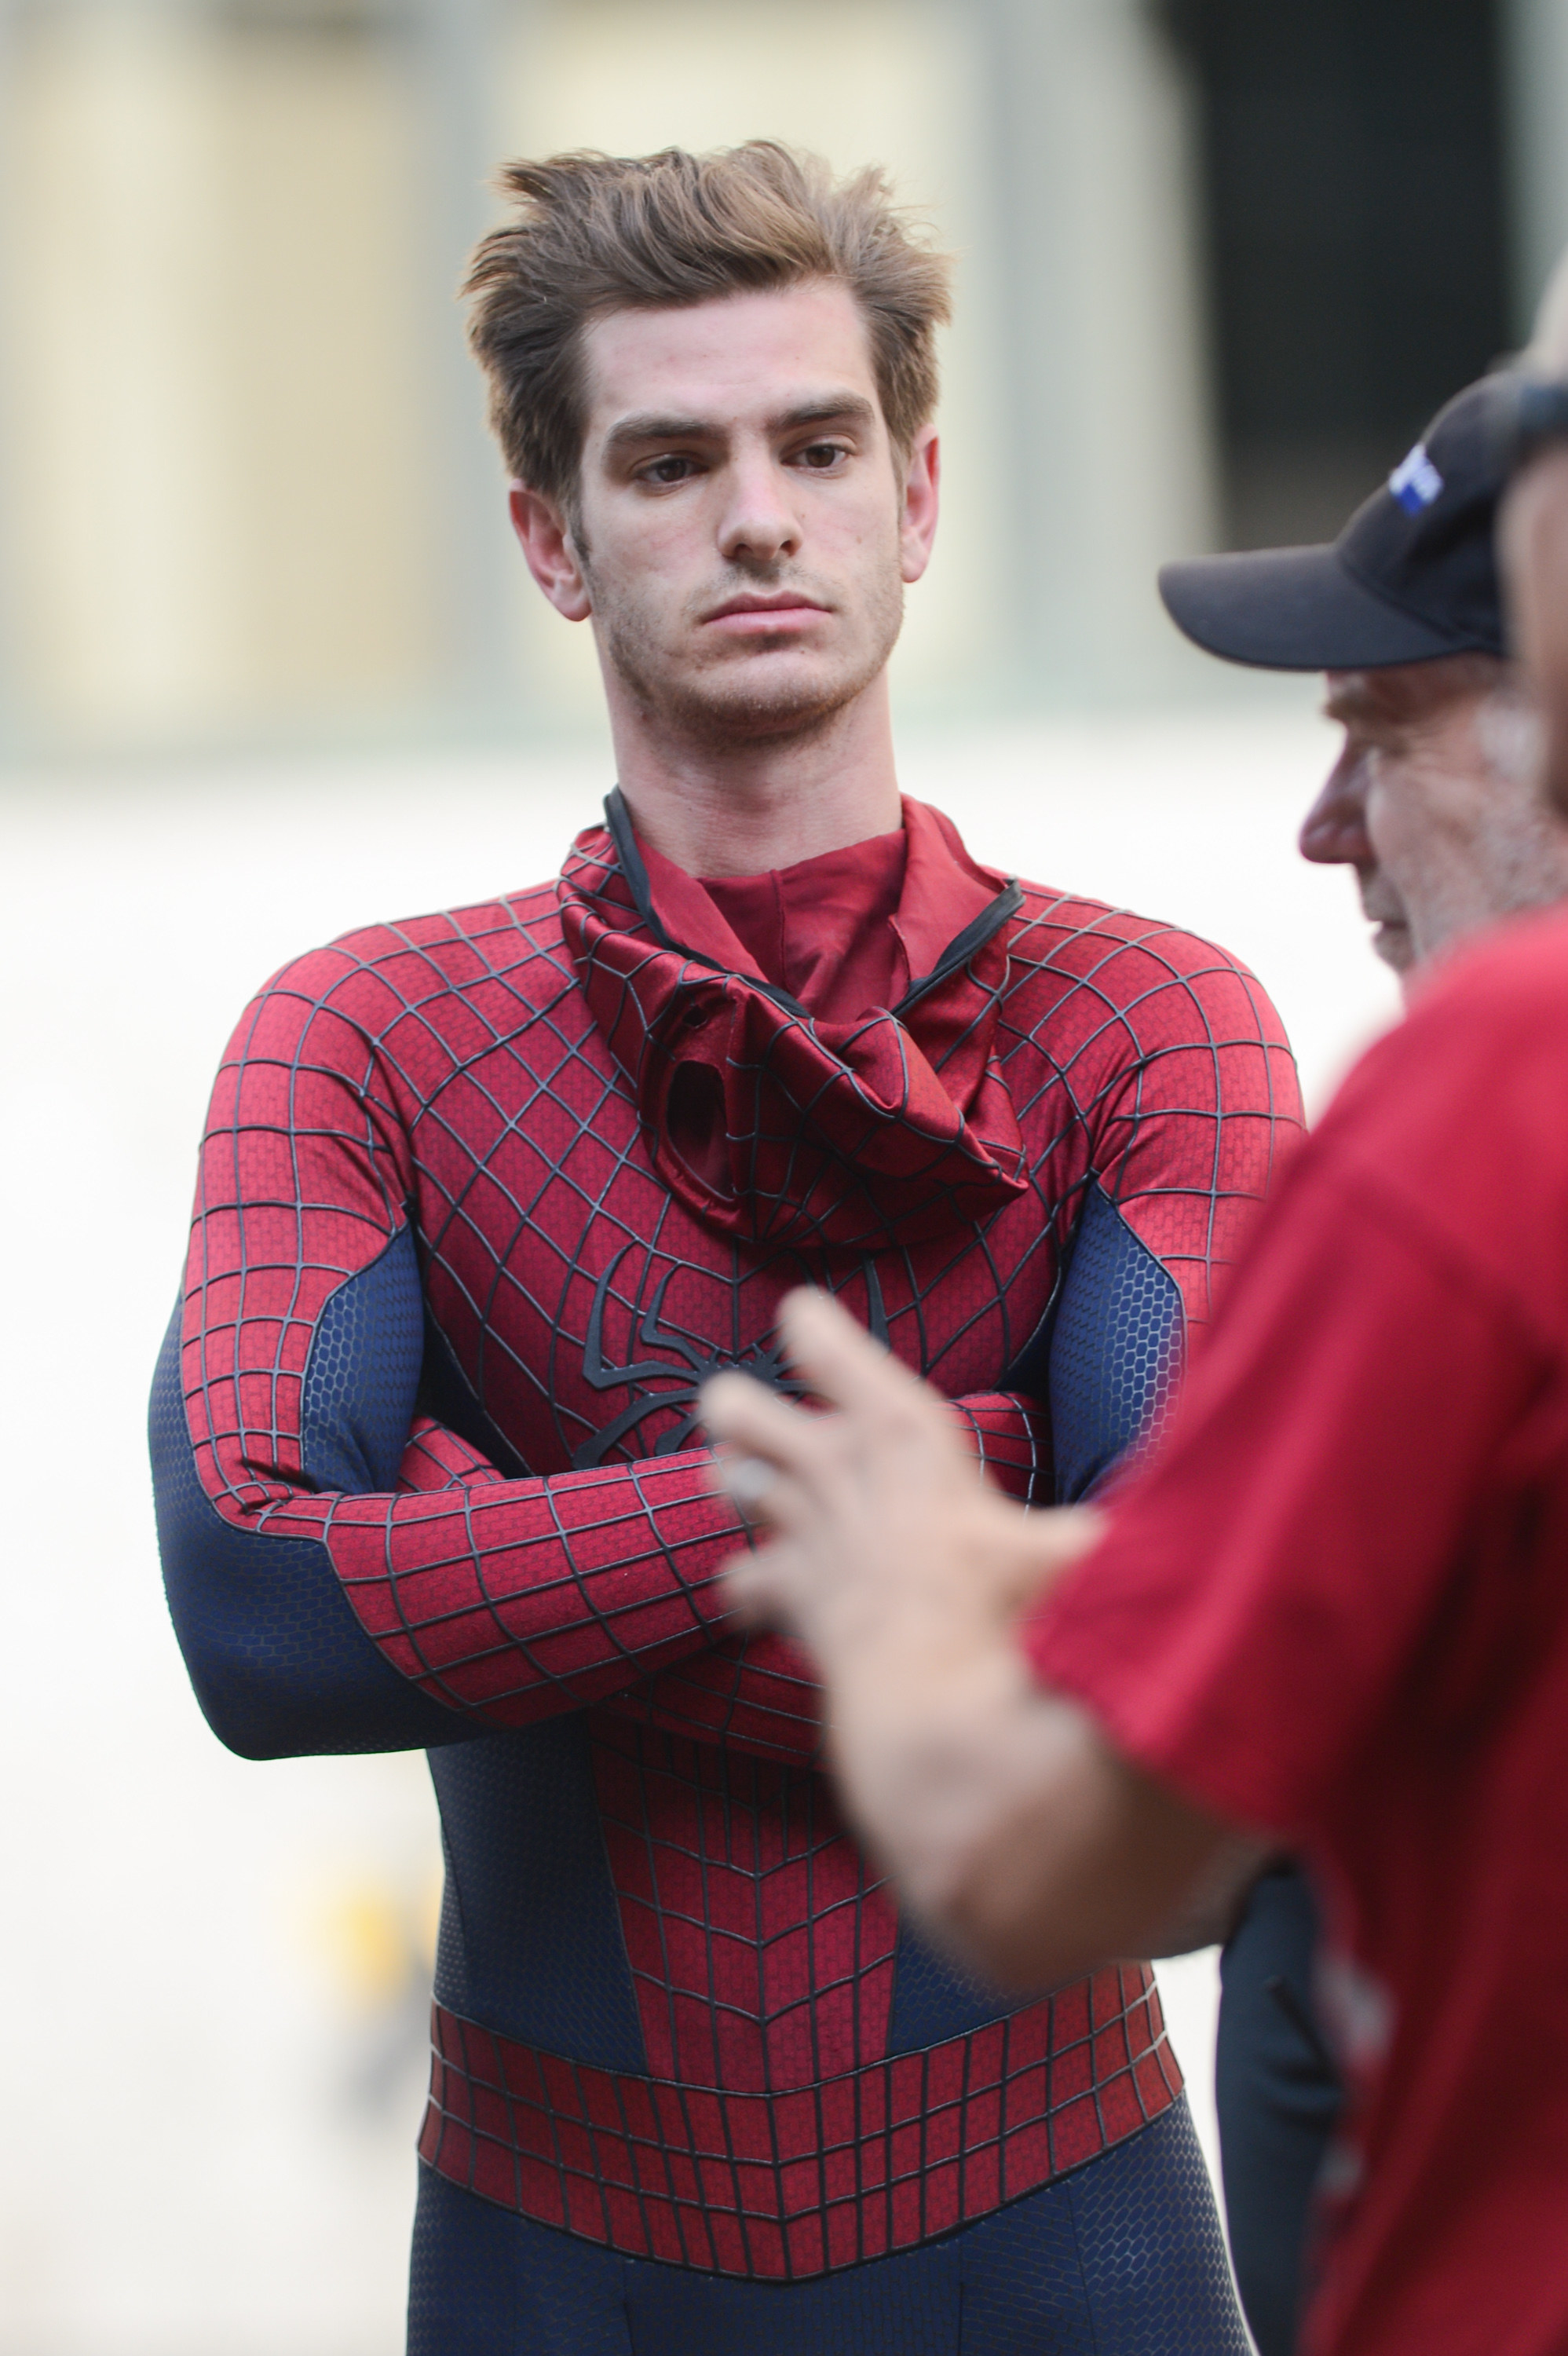 Andrew as Spider-Man